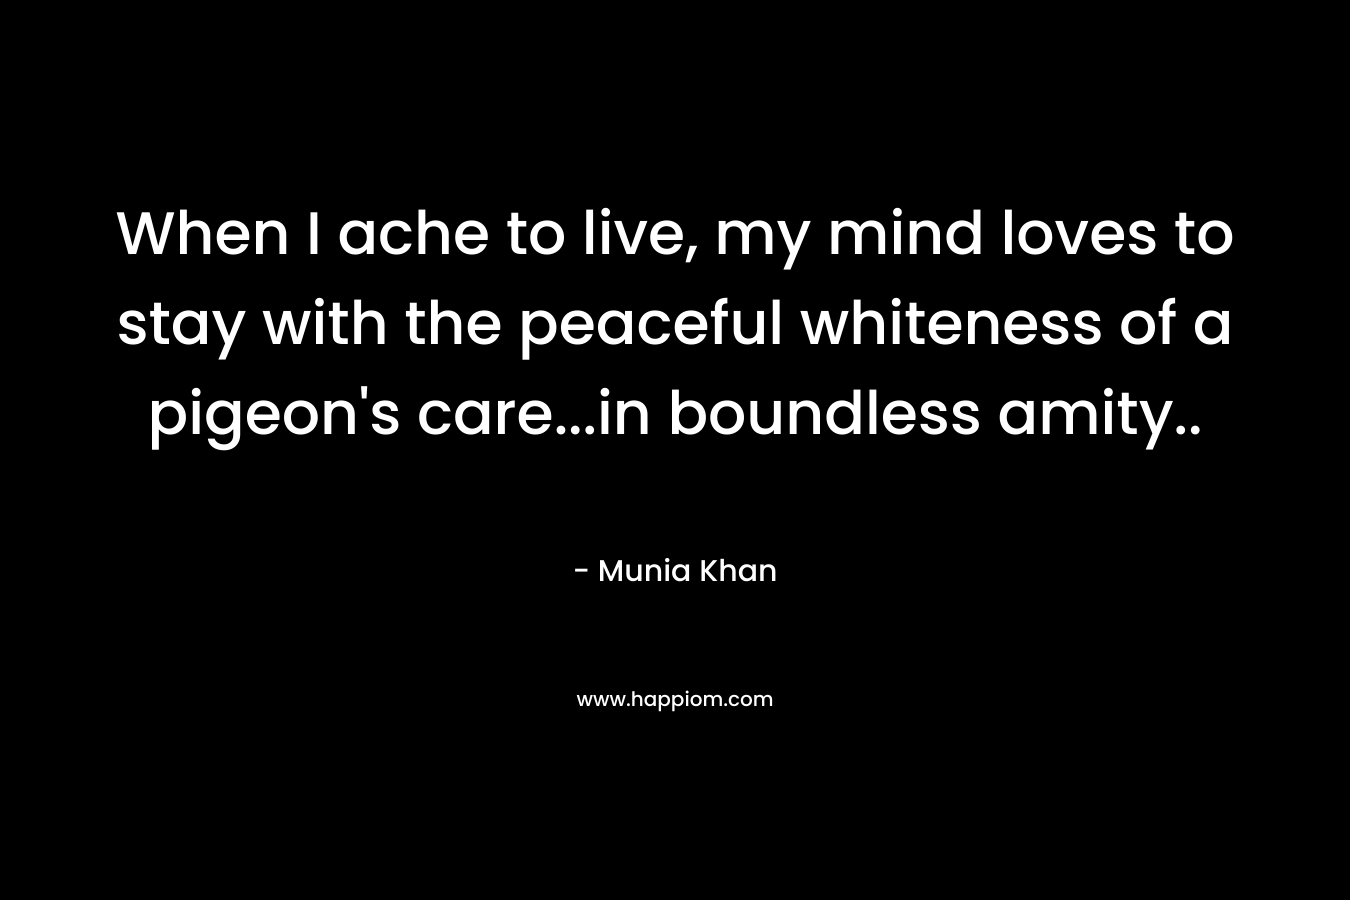 When I ache to live, my mind loves to stay with the peaceful whiteness of a pigeon's care...in boundless amity..